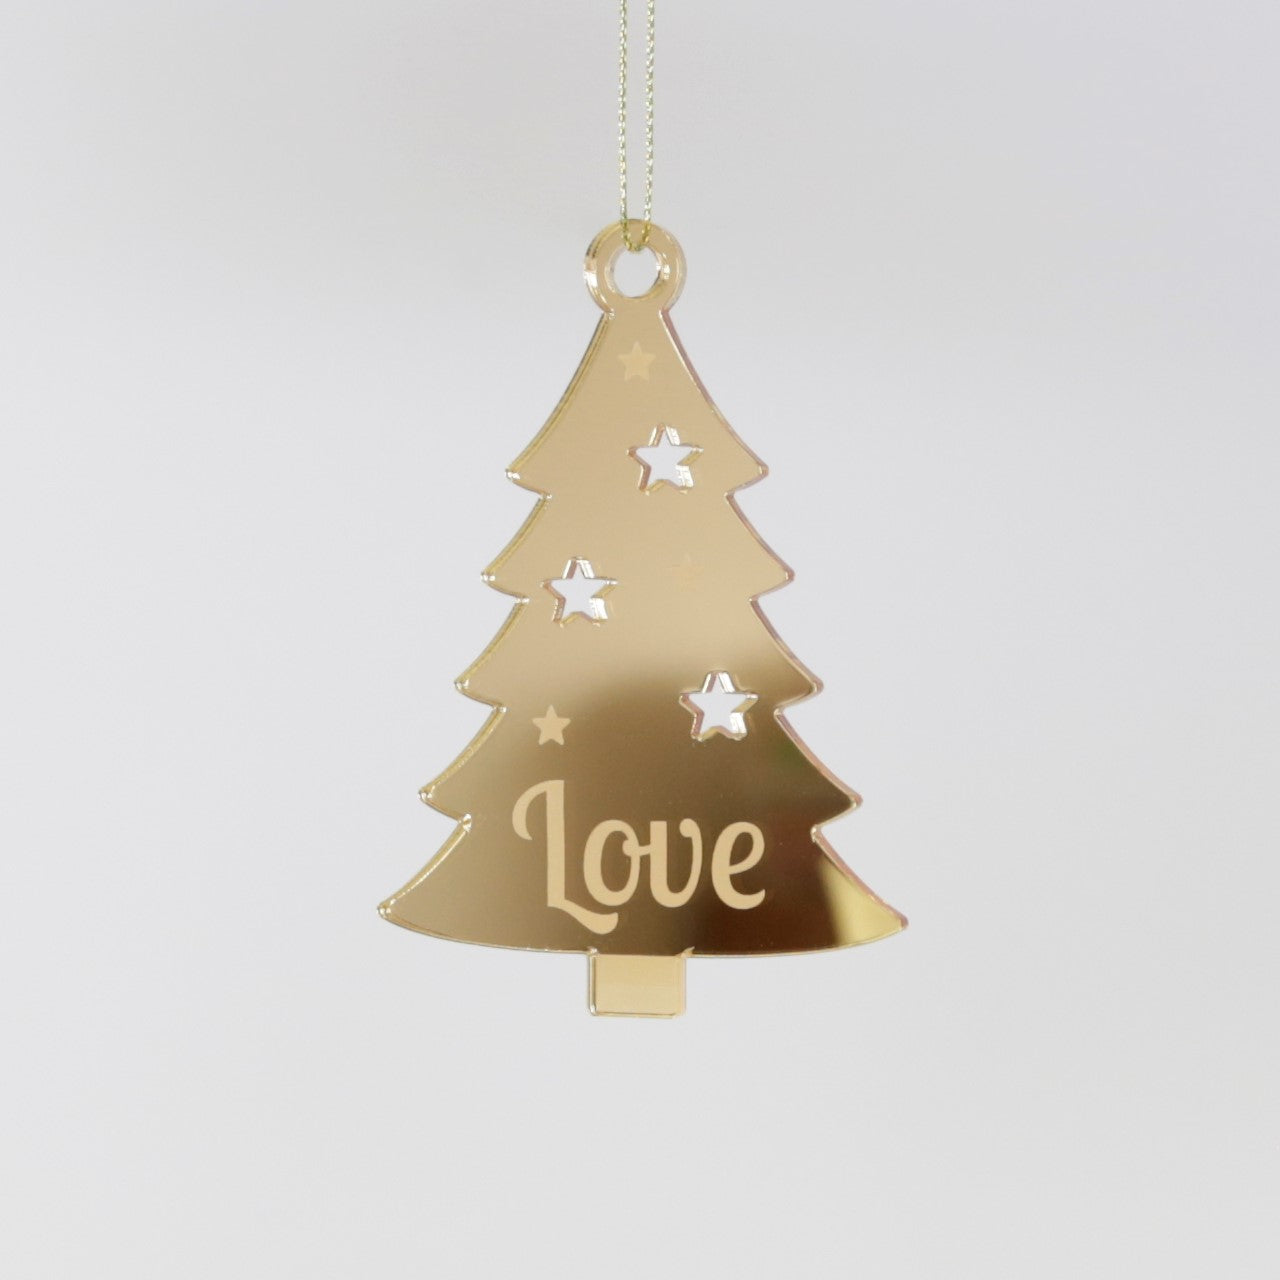 Gold mirror laser etched christmas ornament in the shape of a tree, says Love